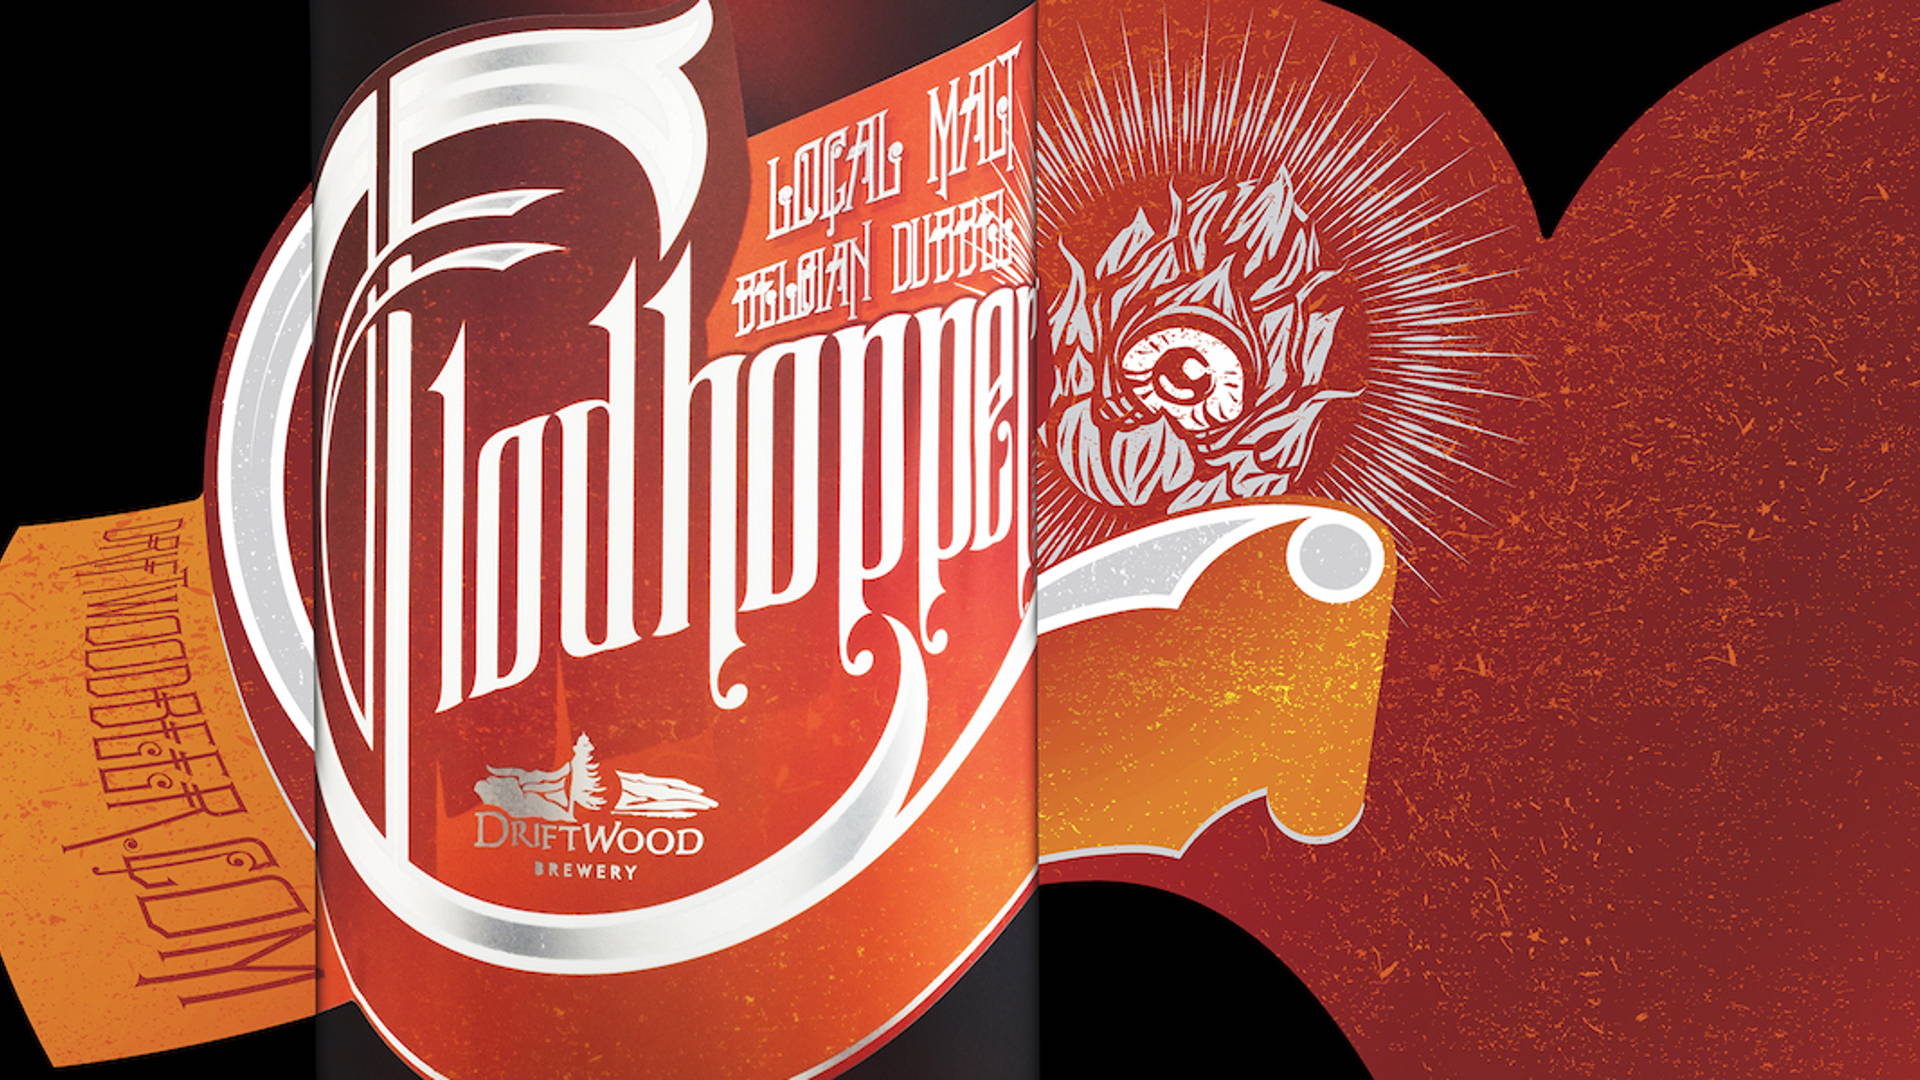 Featured image for Clodhopper Beer for Driftwood Brewery